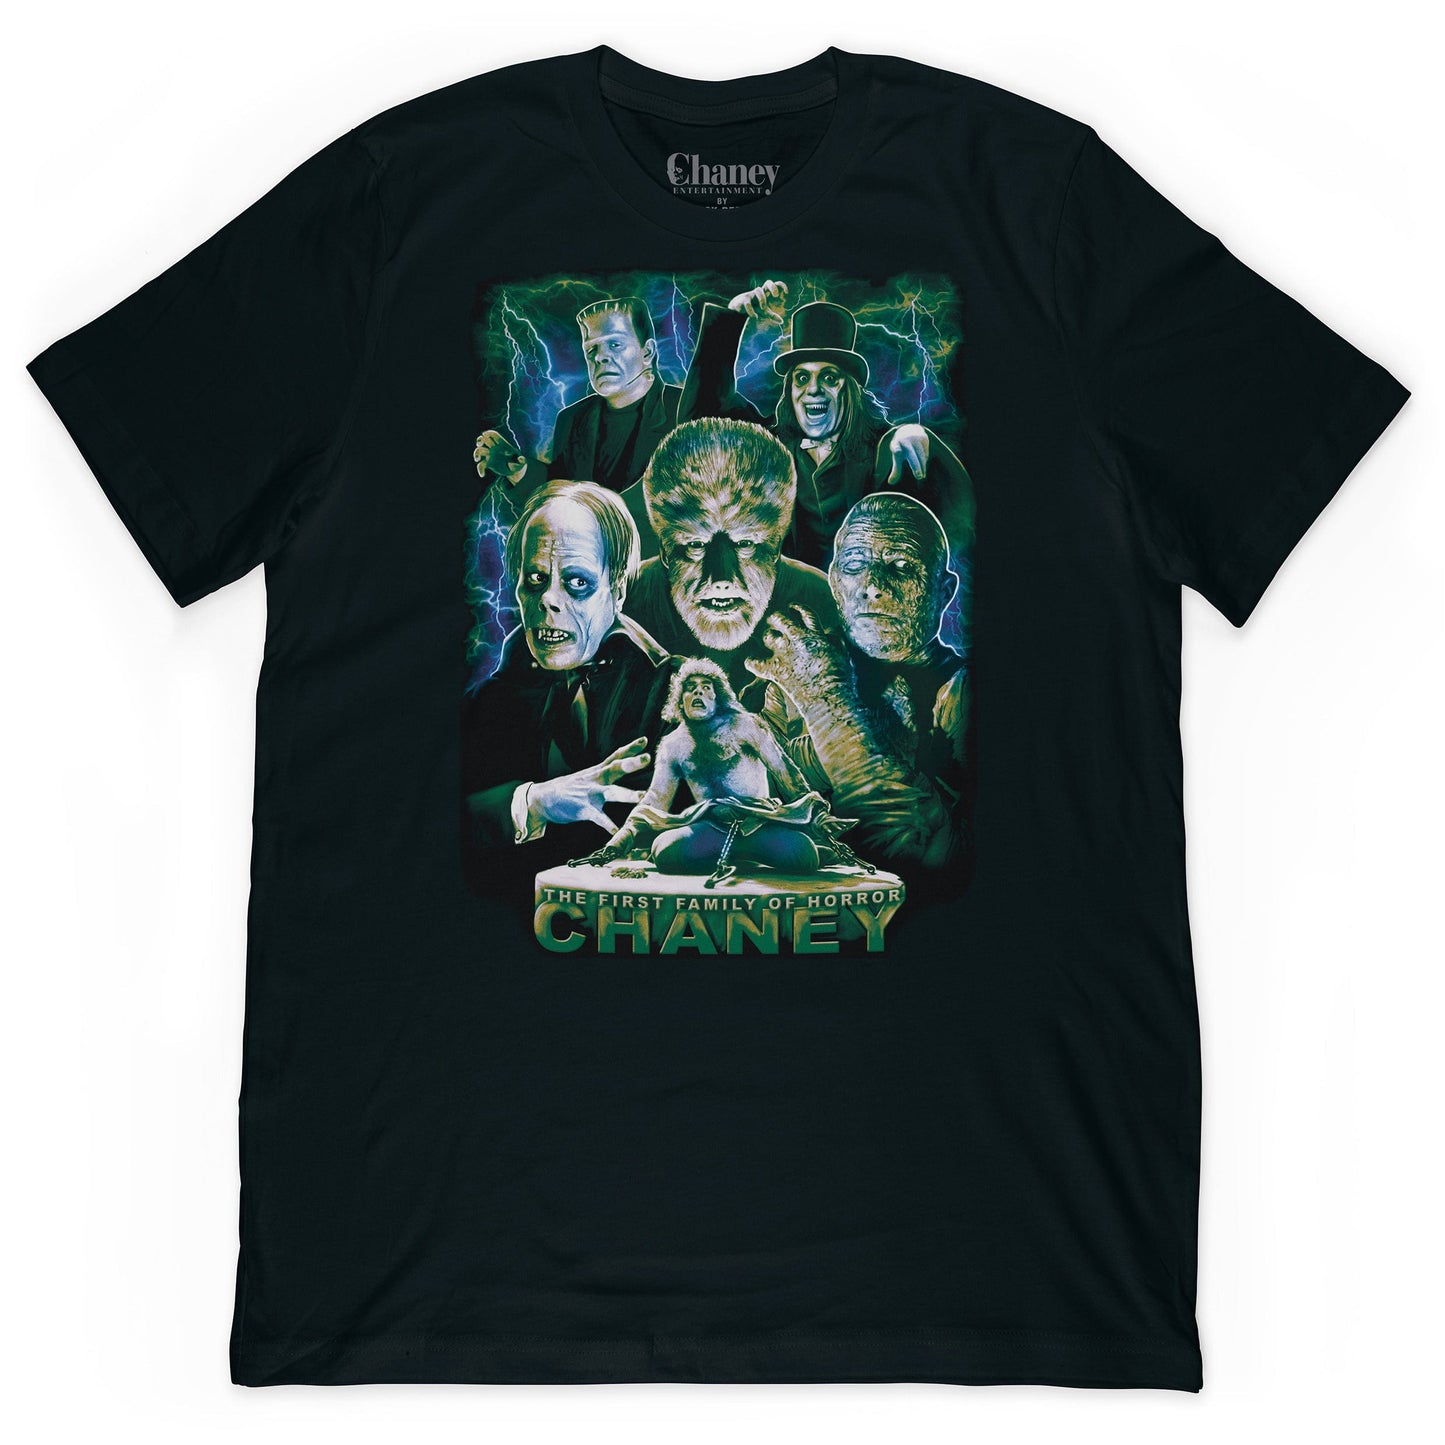 Chaney - The First Family of Horror Men's Tee